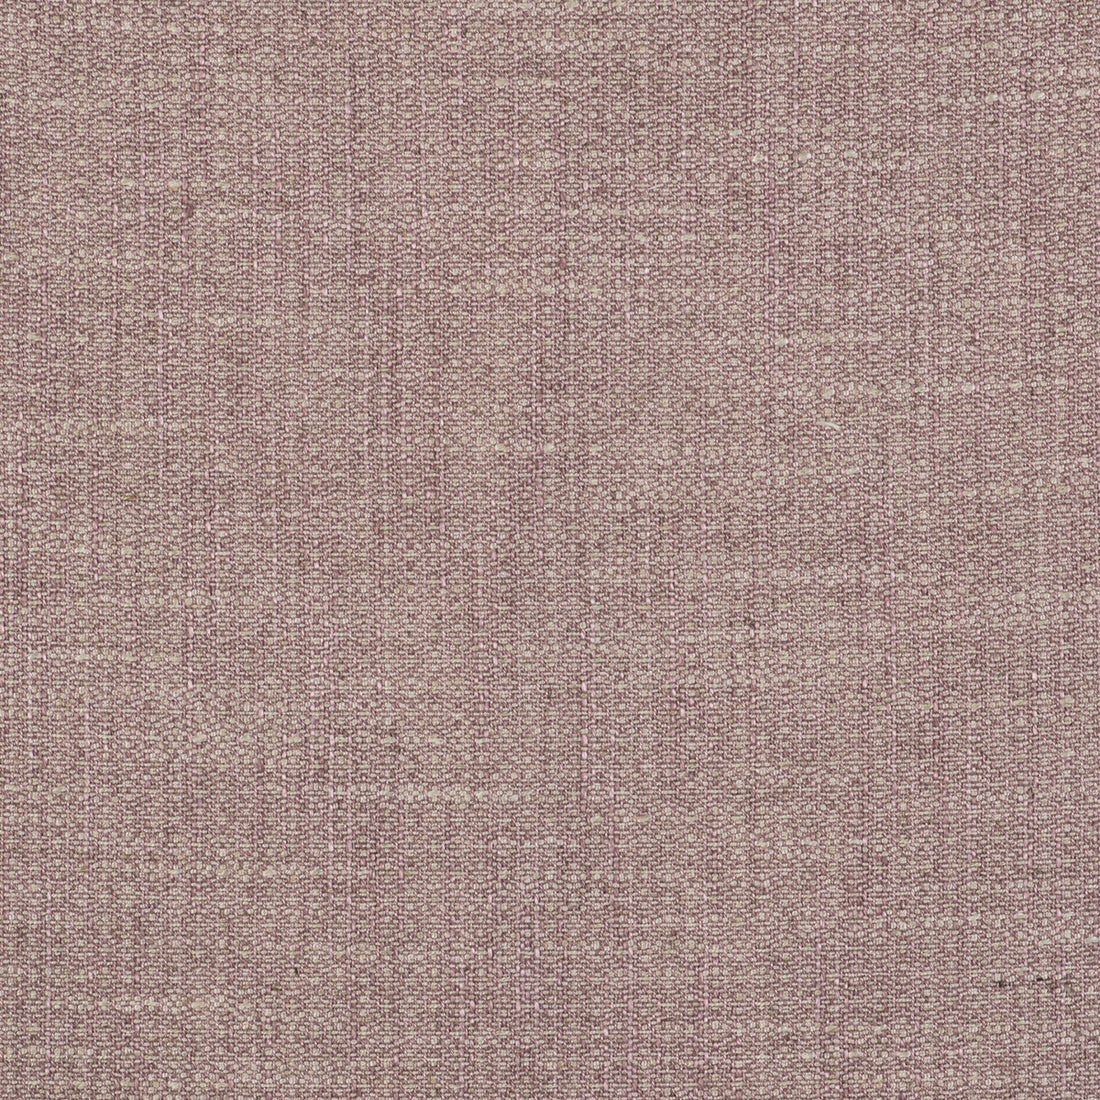 Kf Gyd fabric - pattern GDT5517.011.0 - by Gaston y Daniela in the Gaston Libreria collection